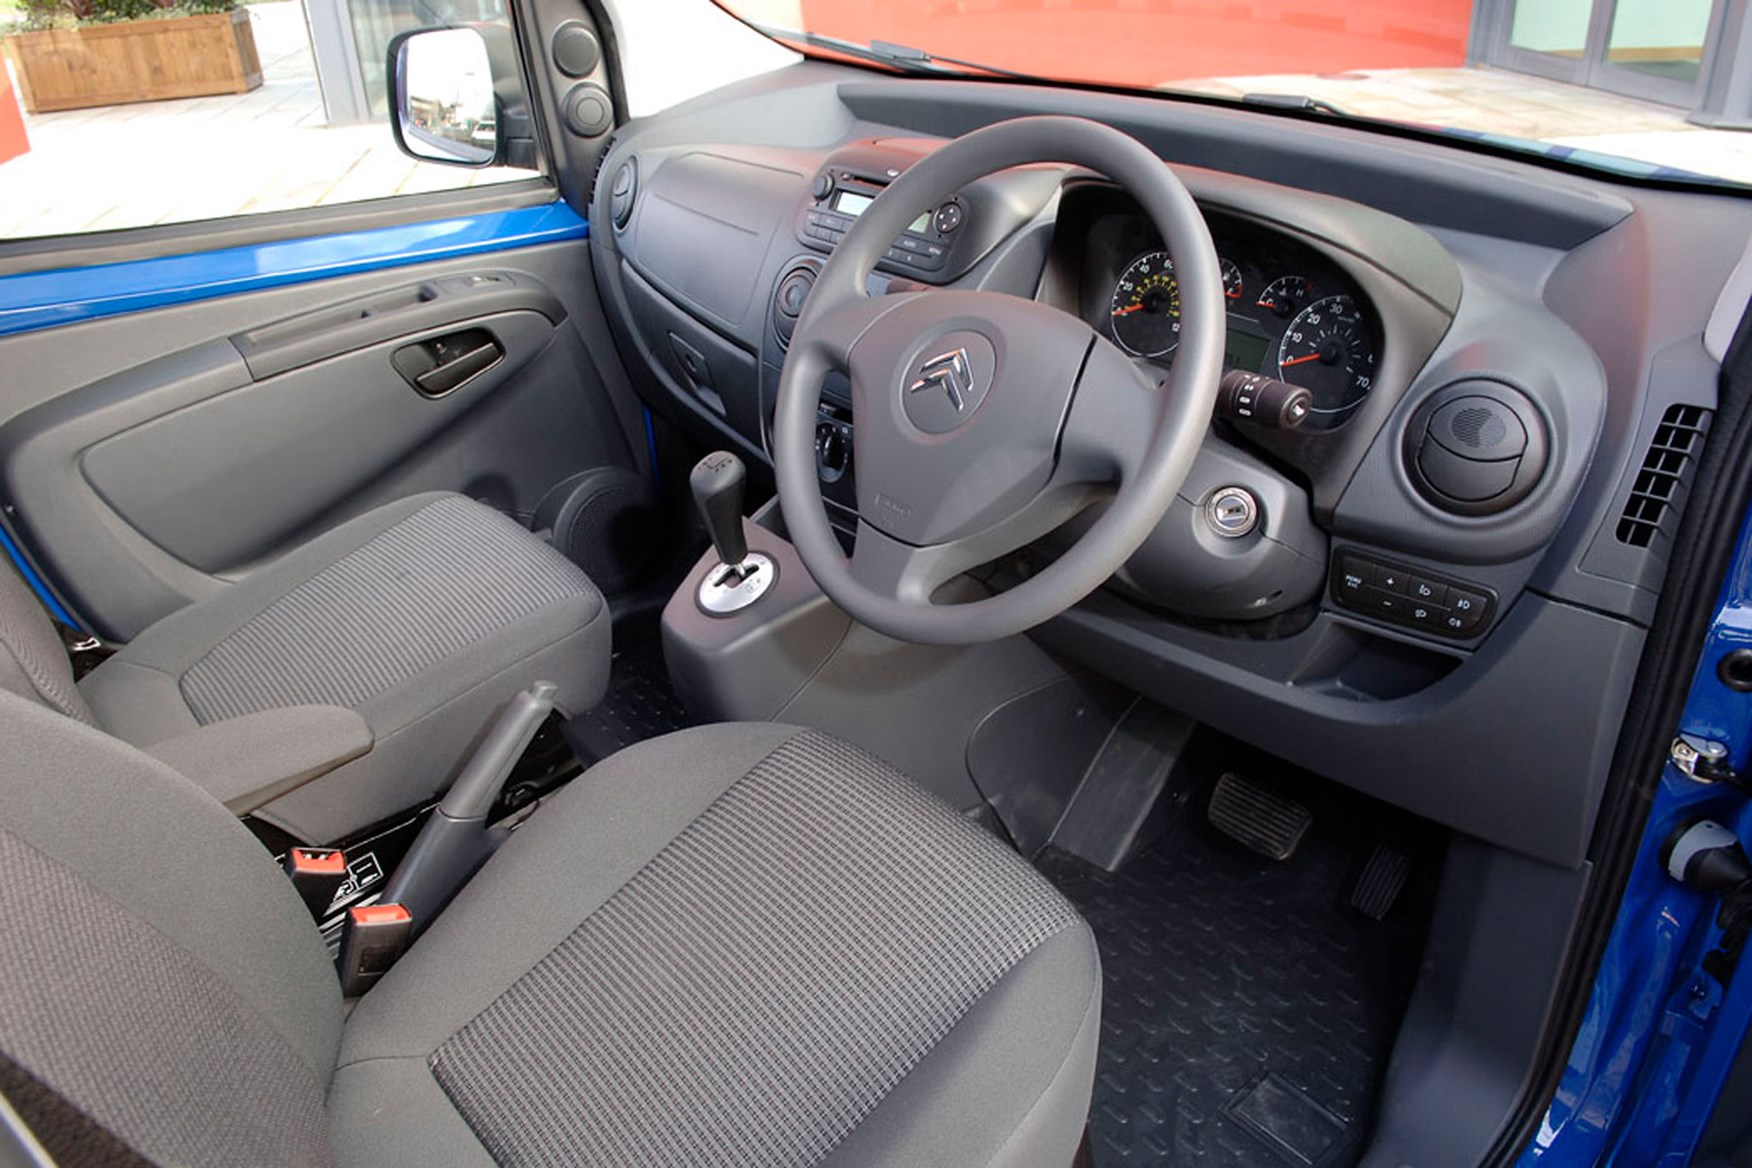 Citroen Nemo review and buying guide - SensoDrive transmission, steering wheel, dashboard